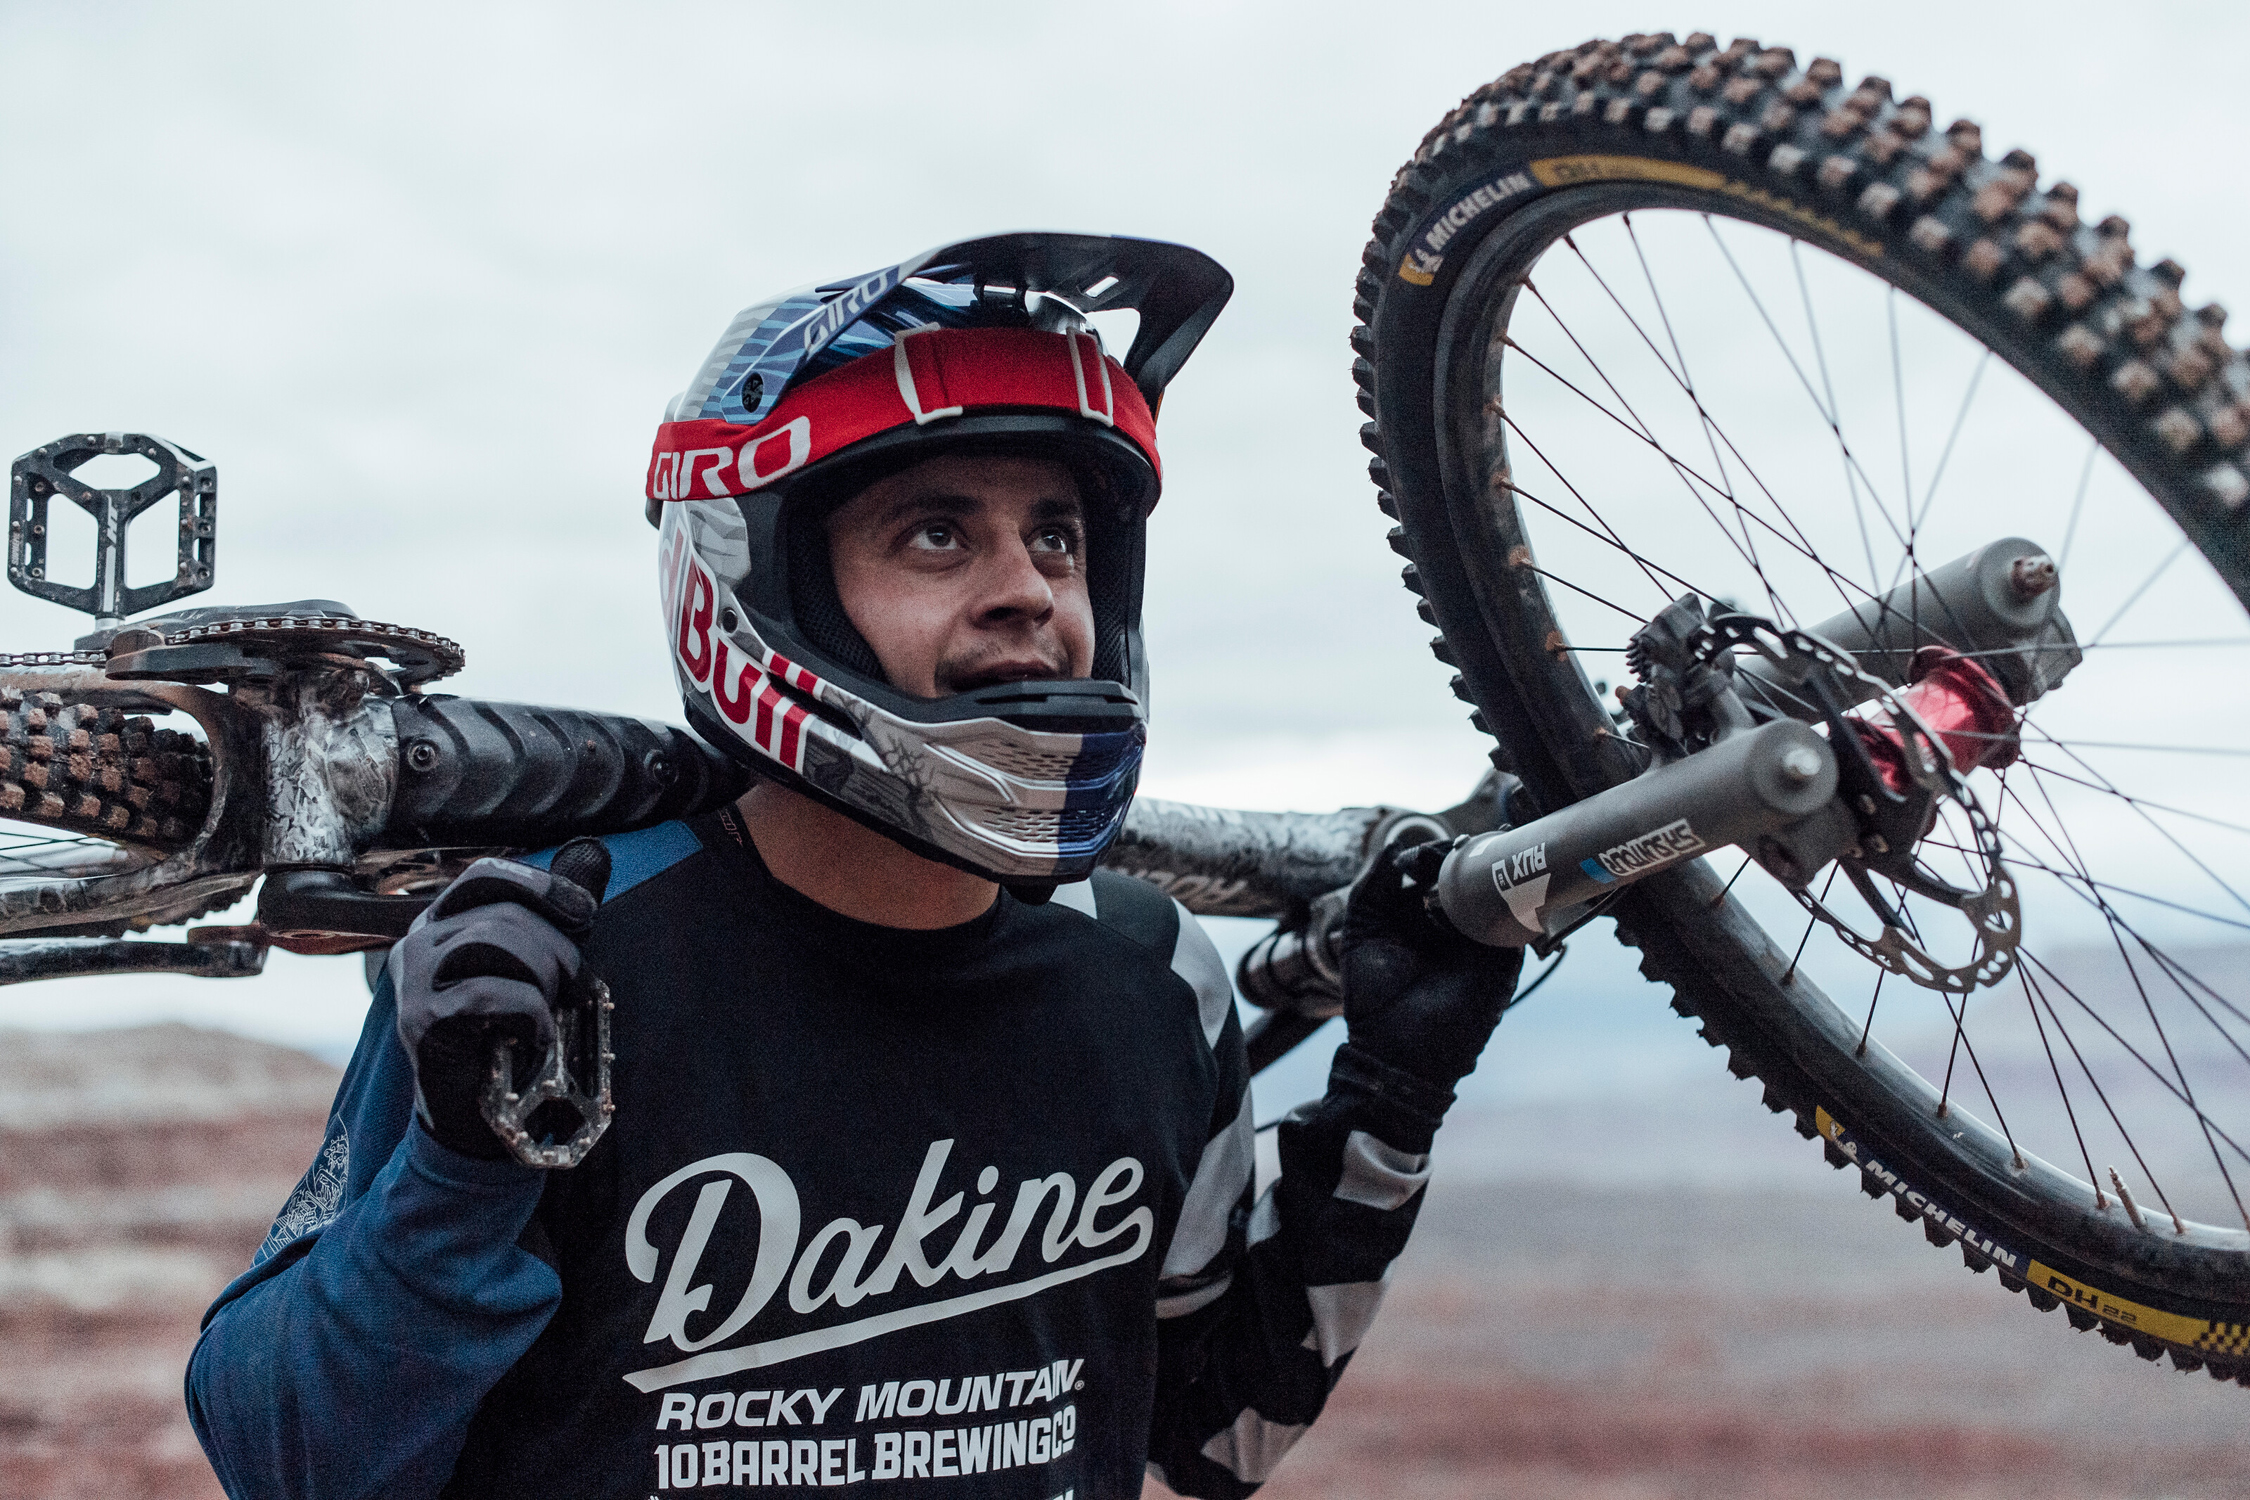 Shimano athlete Carson Storch Red Bull Rampage